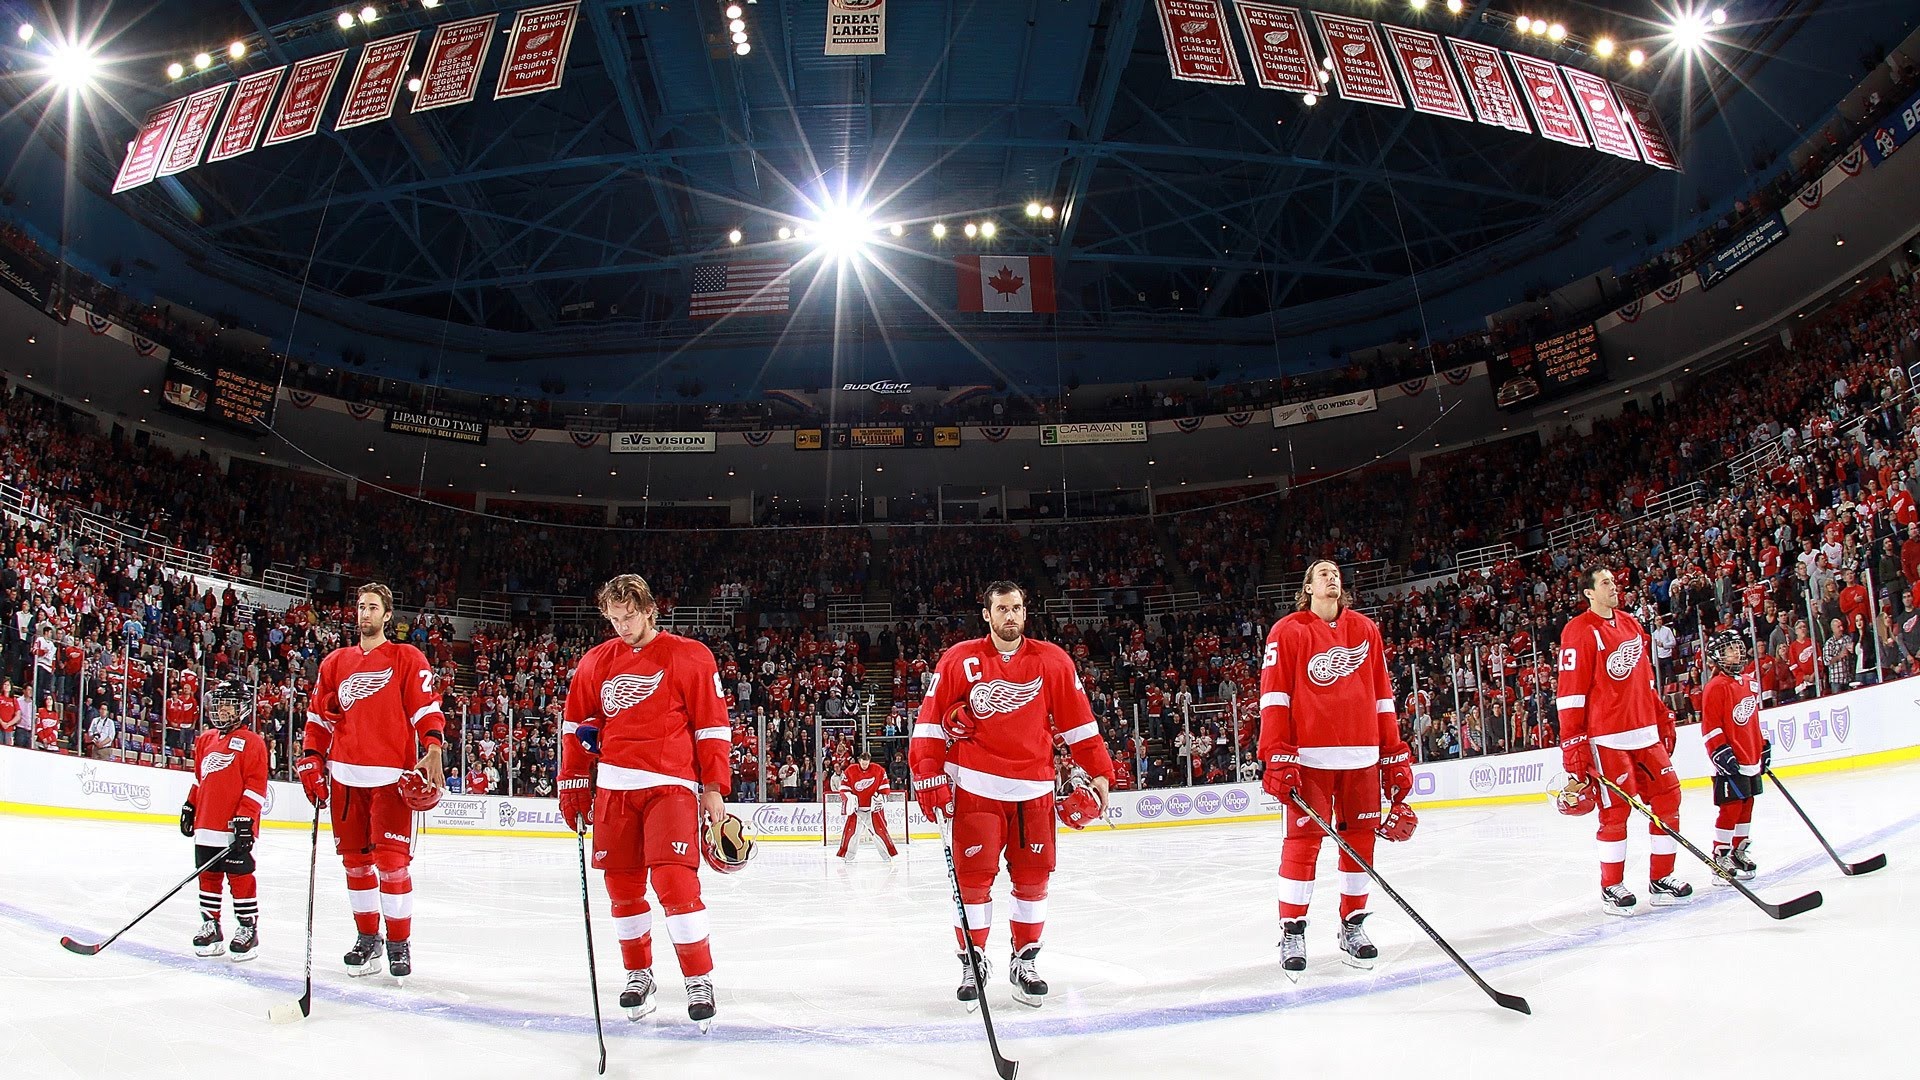 Detroit Red Wings: Achieved a seven straight regular season titles, an NHL record. 1920x1080 Full HD Wallpaper.